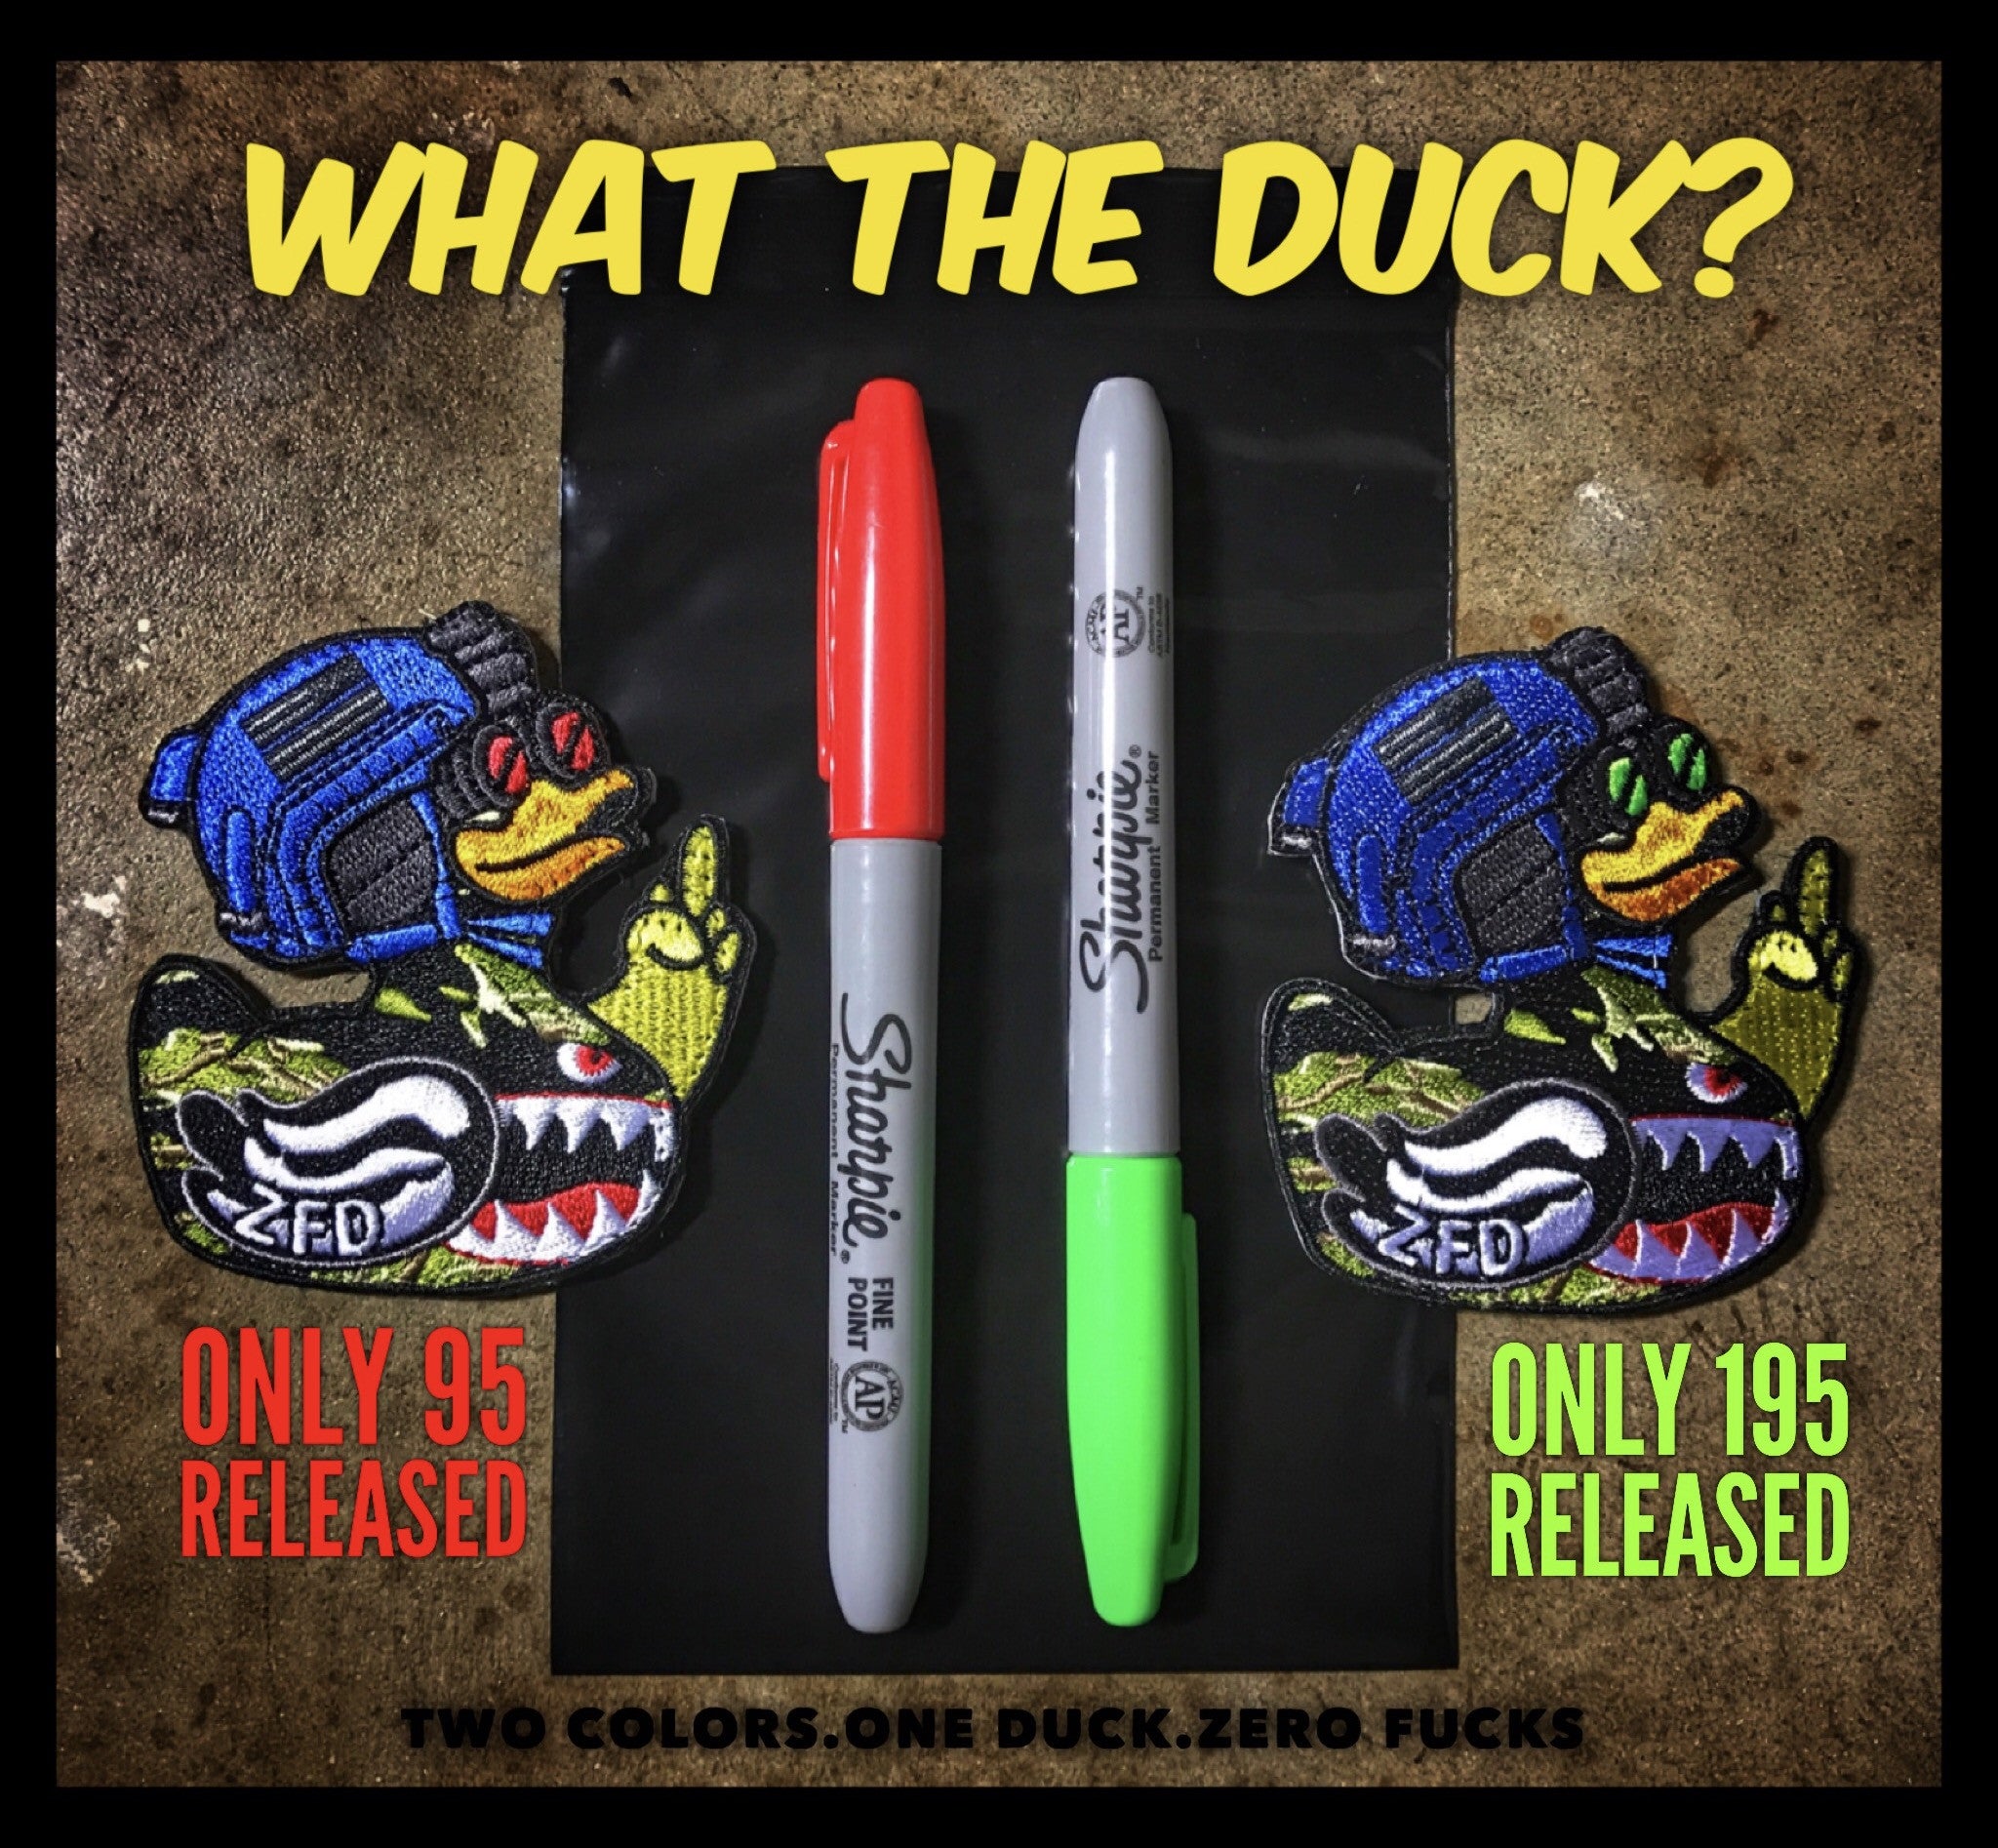 ZERO FUCKS DUCK "ZFD" LIMITED EDITION MORALE PATCH - "WHAT THE DUCK"